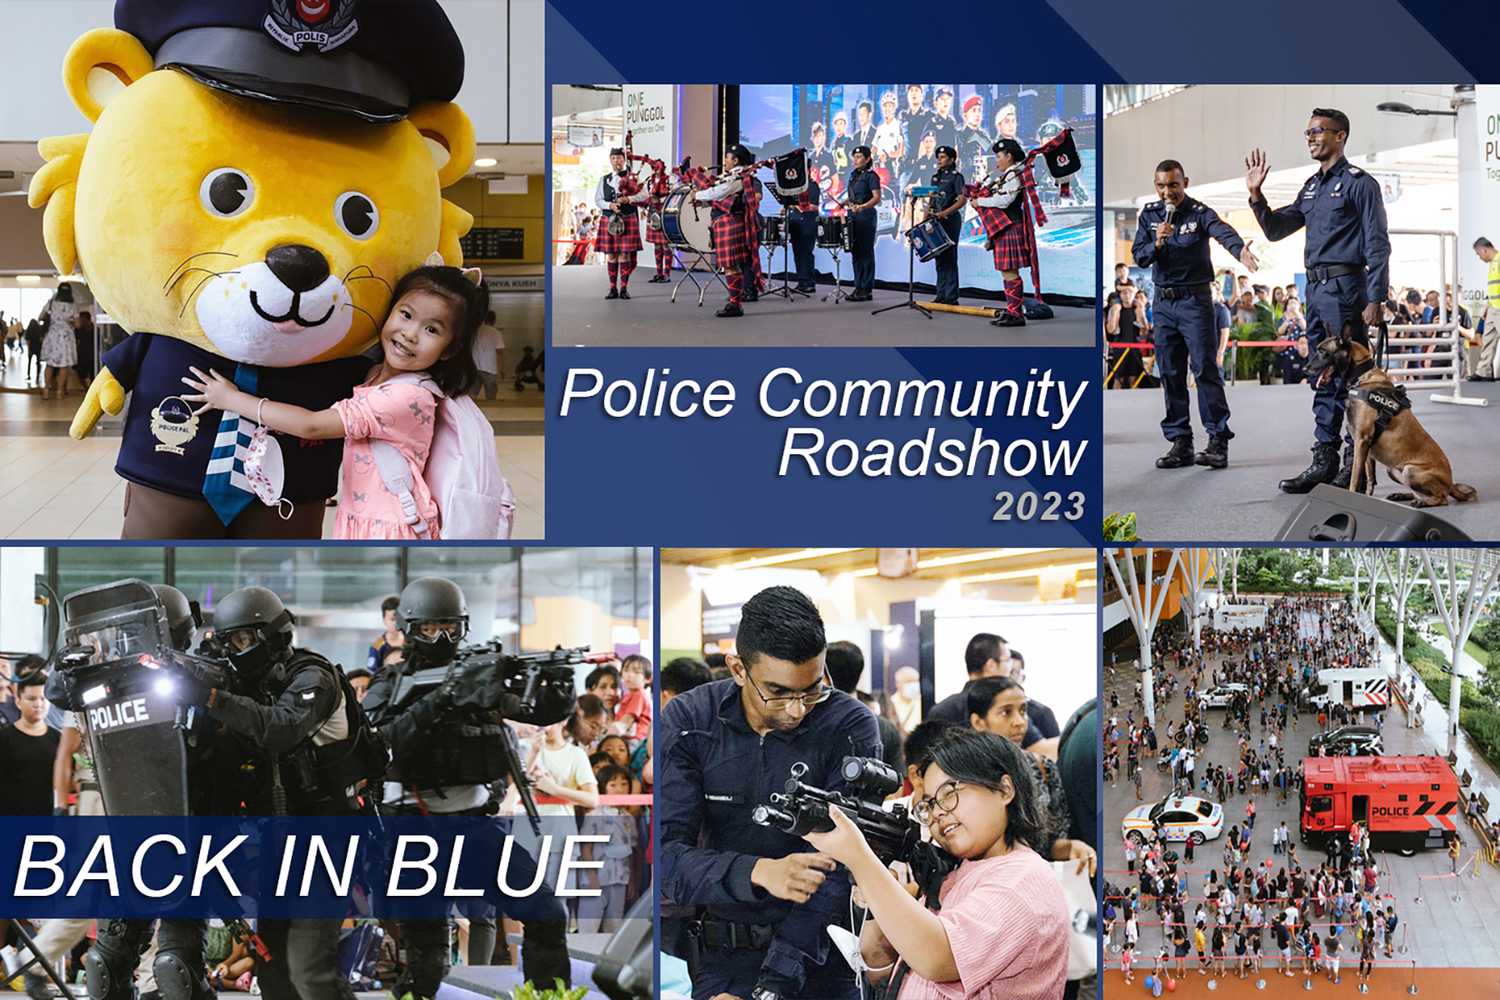 Police Life 062023 Back in Blue Police Community Roadshow 2023 01